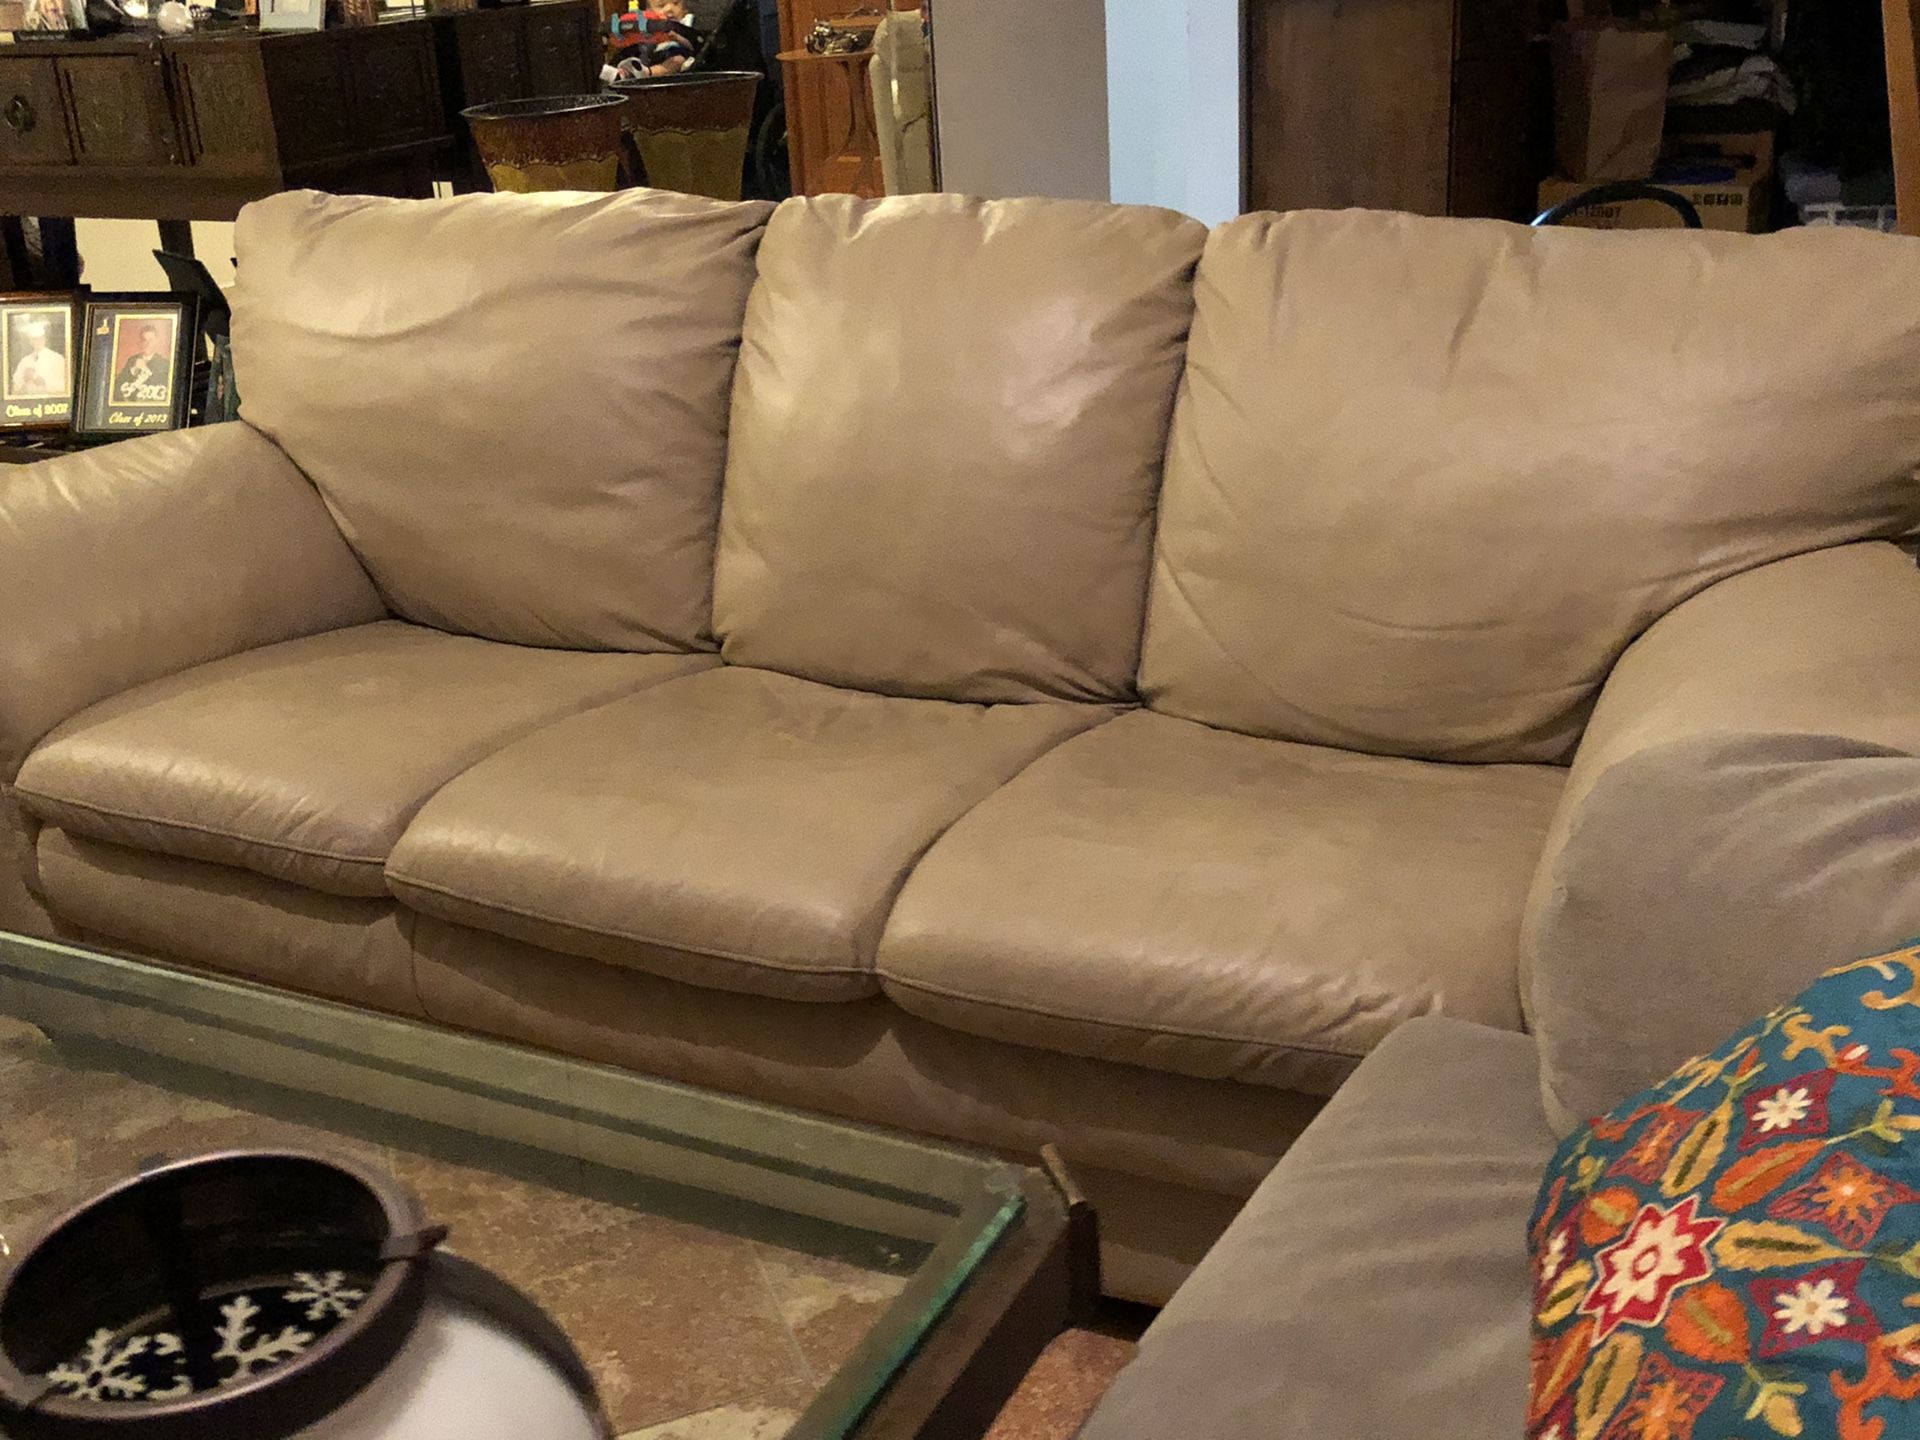 2 Beige Couches (1 Full-size and 1 Loveseat)